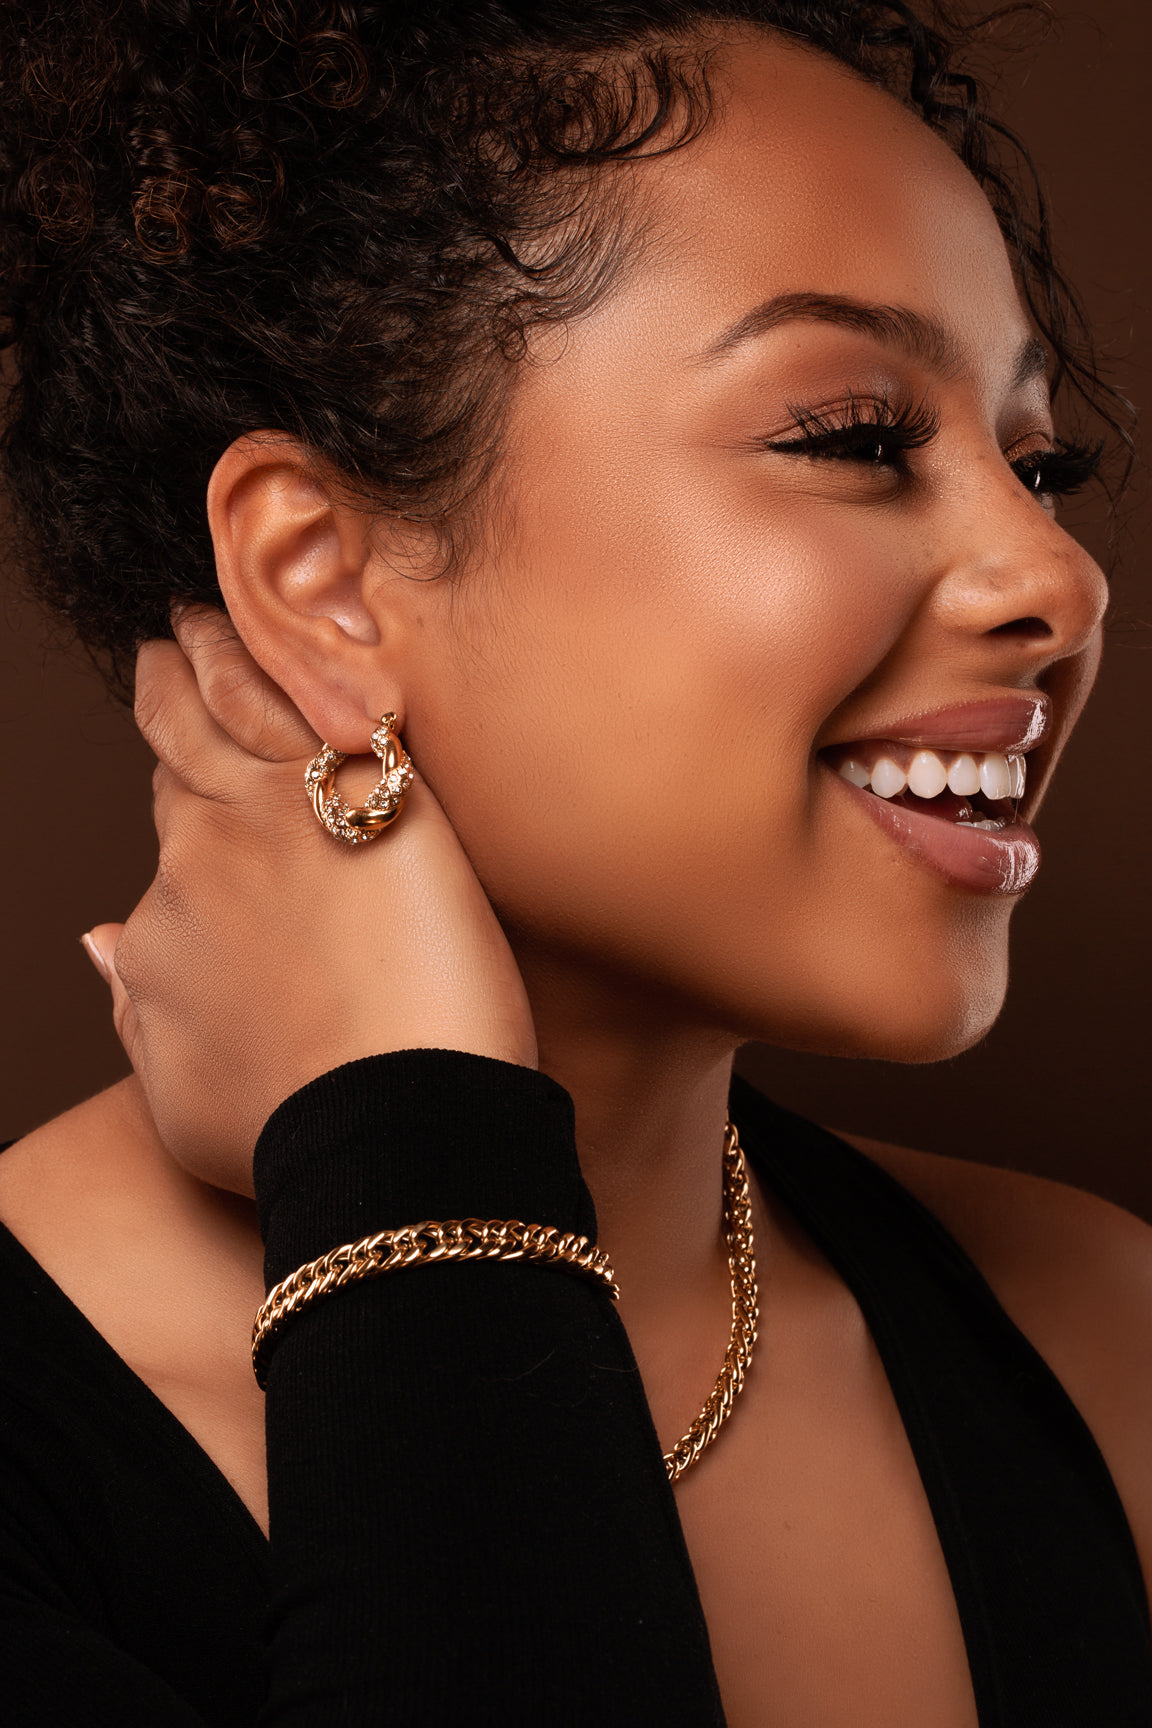 Full view Natalia Hoop earrings. Gold plated stainless steel, with twisted pave' cubic zirconia stones.